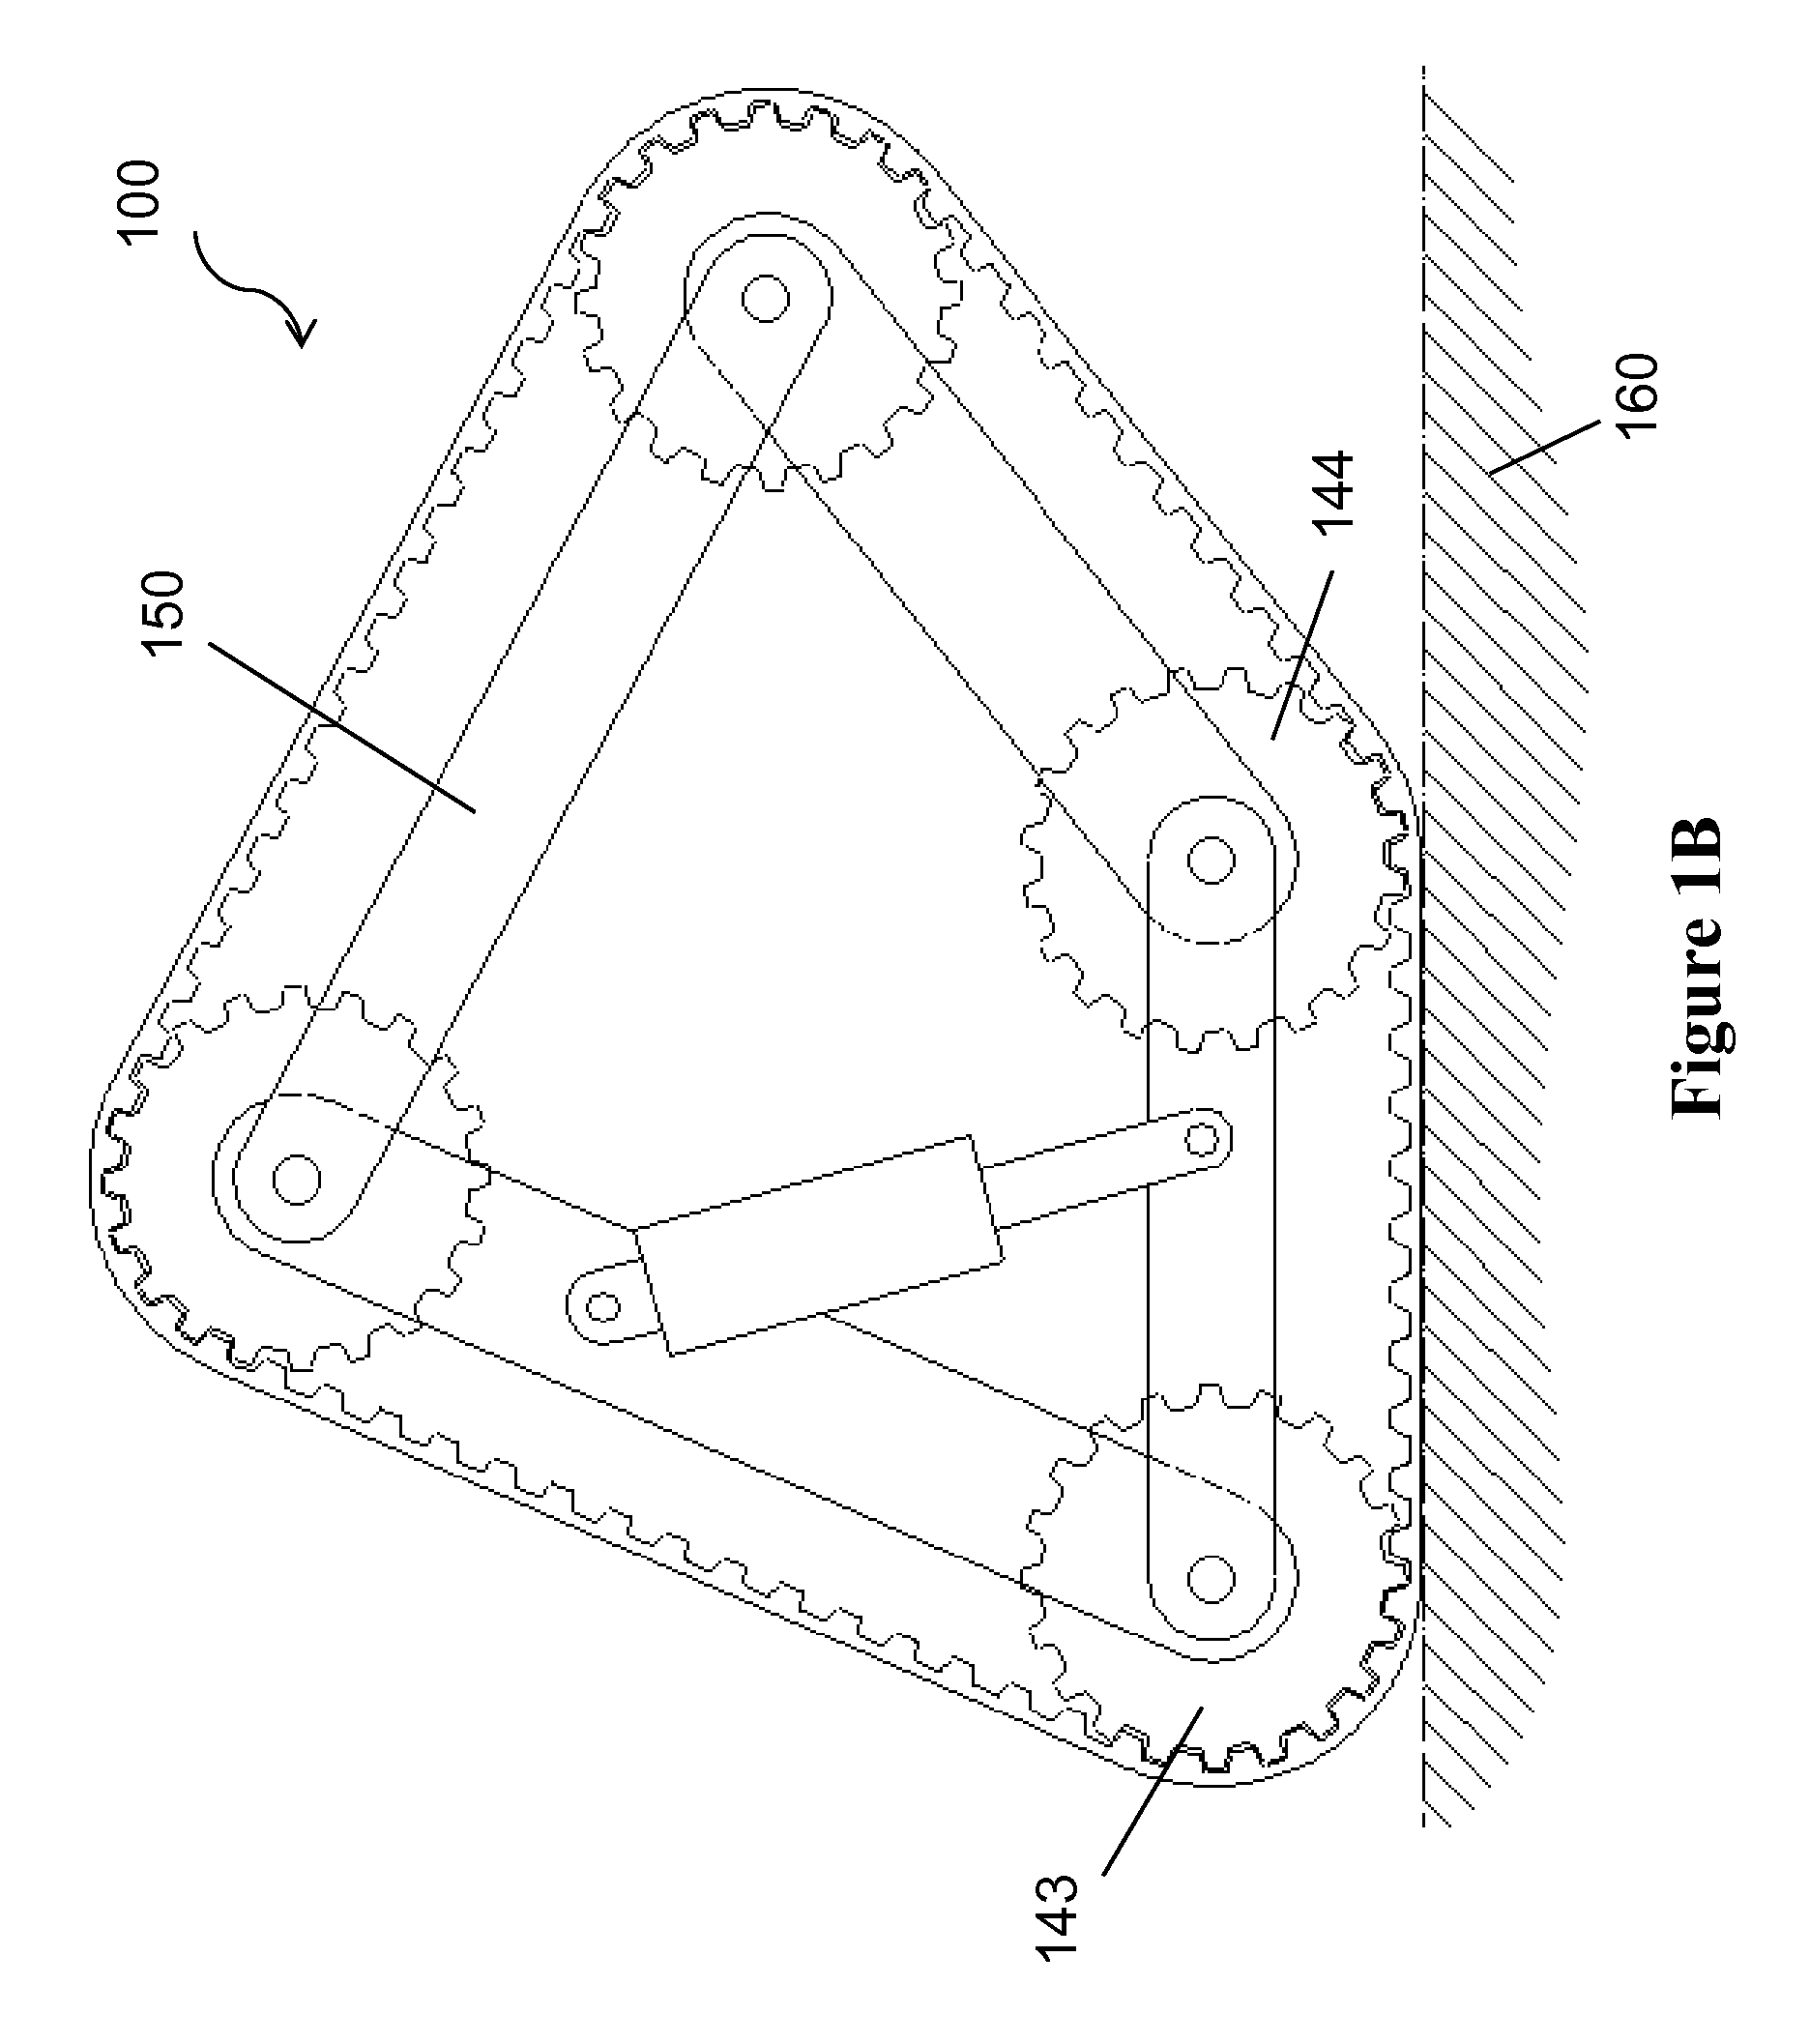 Deformable track support for tracked vehicles